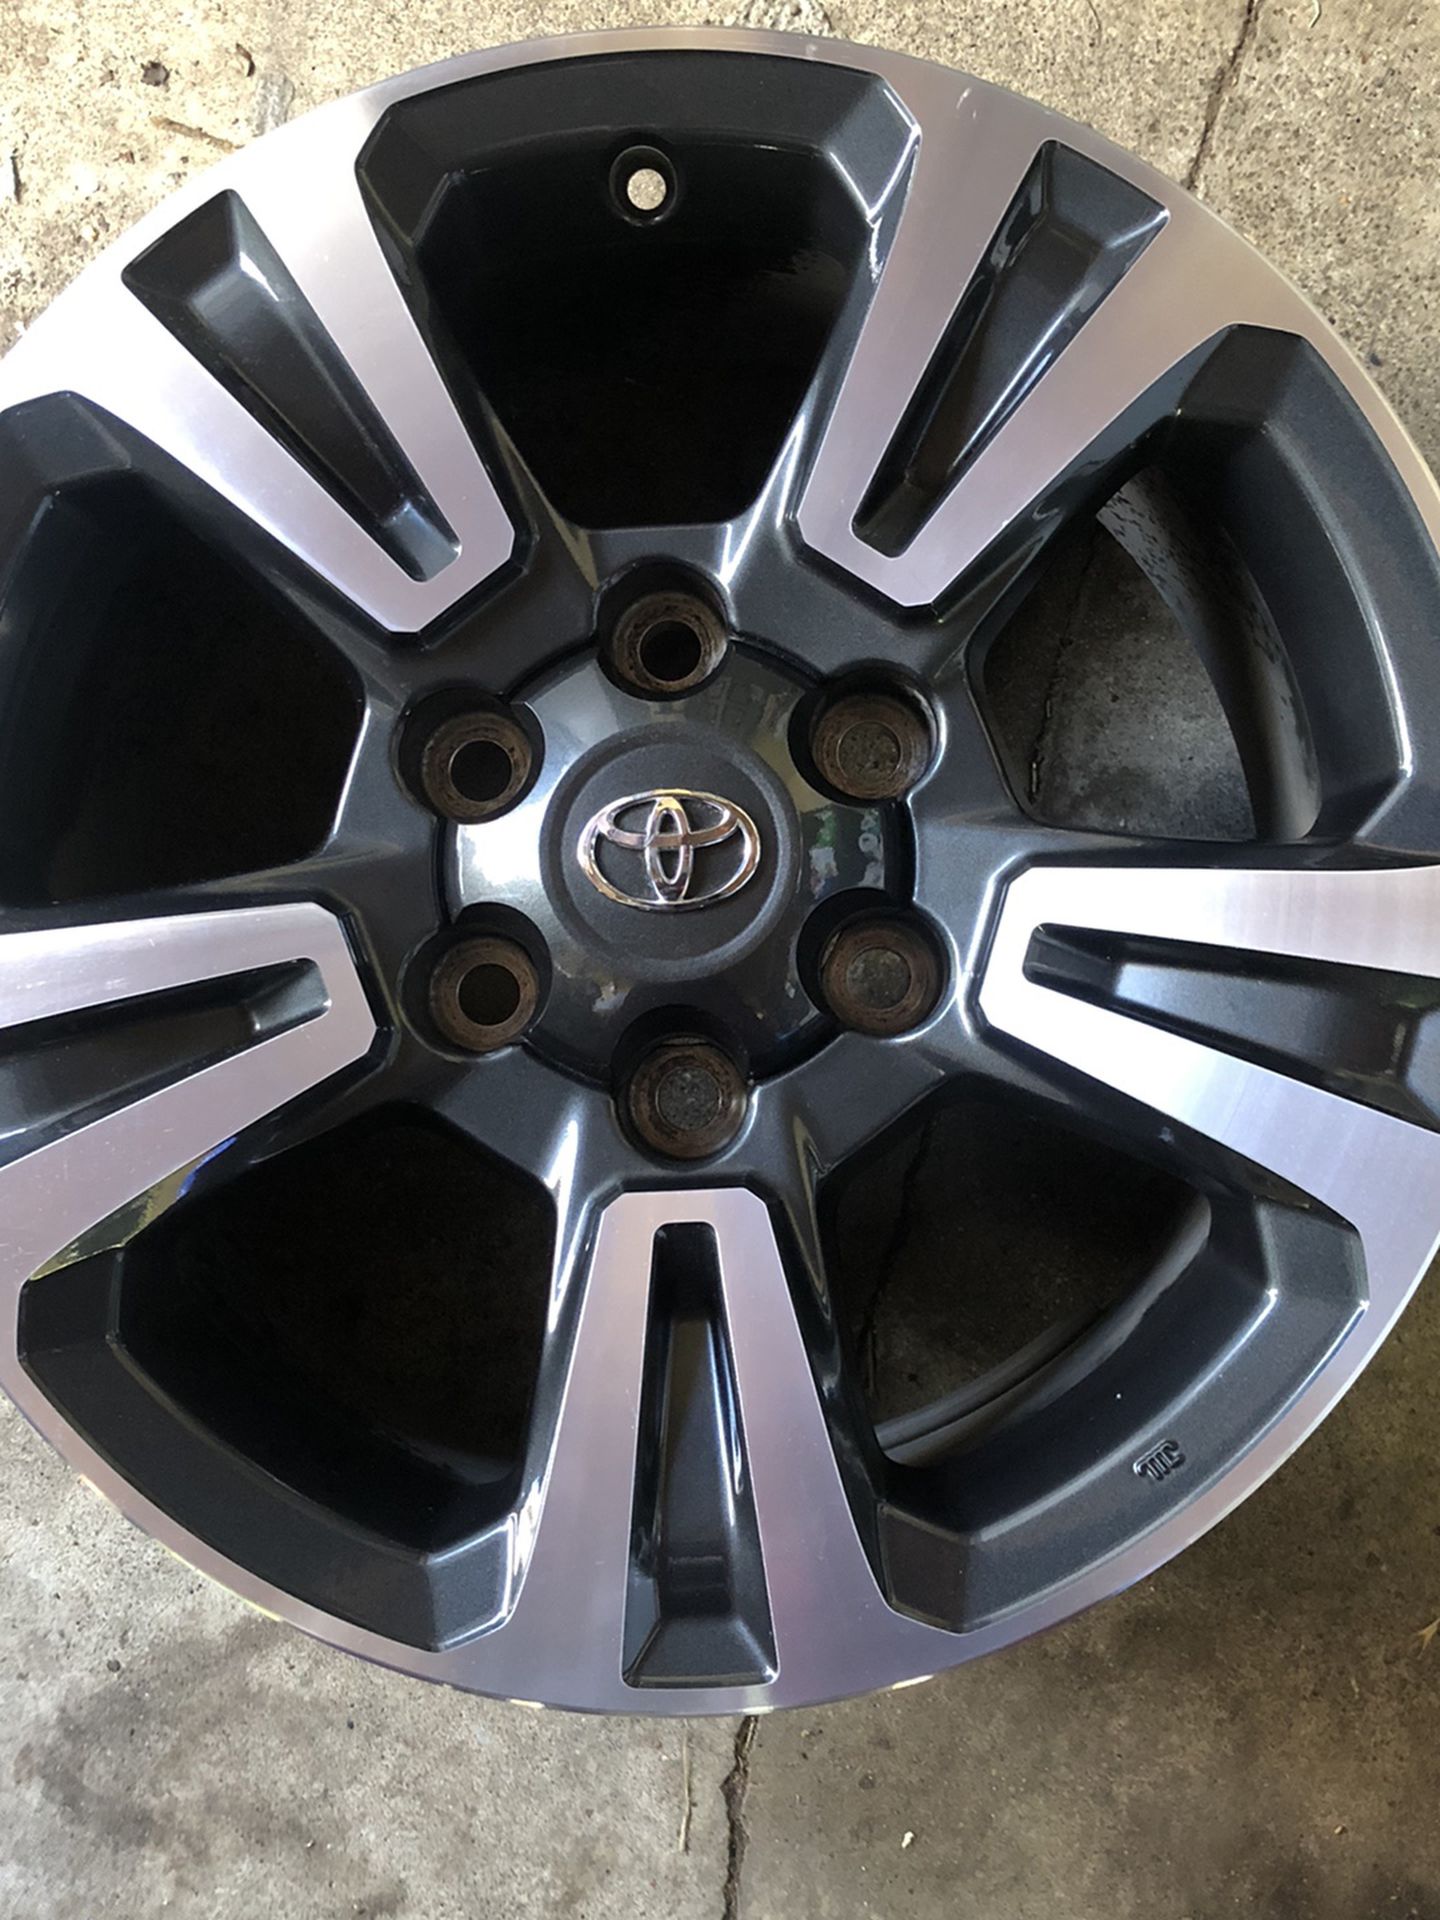 4 RIMS TOYOTA SIZE 17 TRD STOCK THEY FIT TACOMA SEQUOIA 4RUNNER GREAT CONDITION AND GREAT SHAPE 6 LUGS 